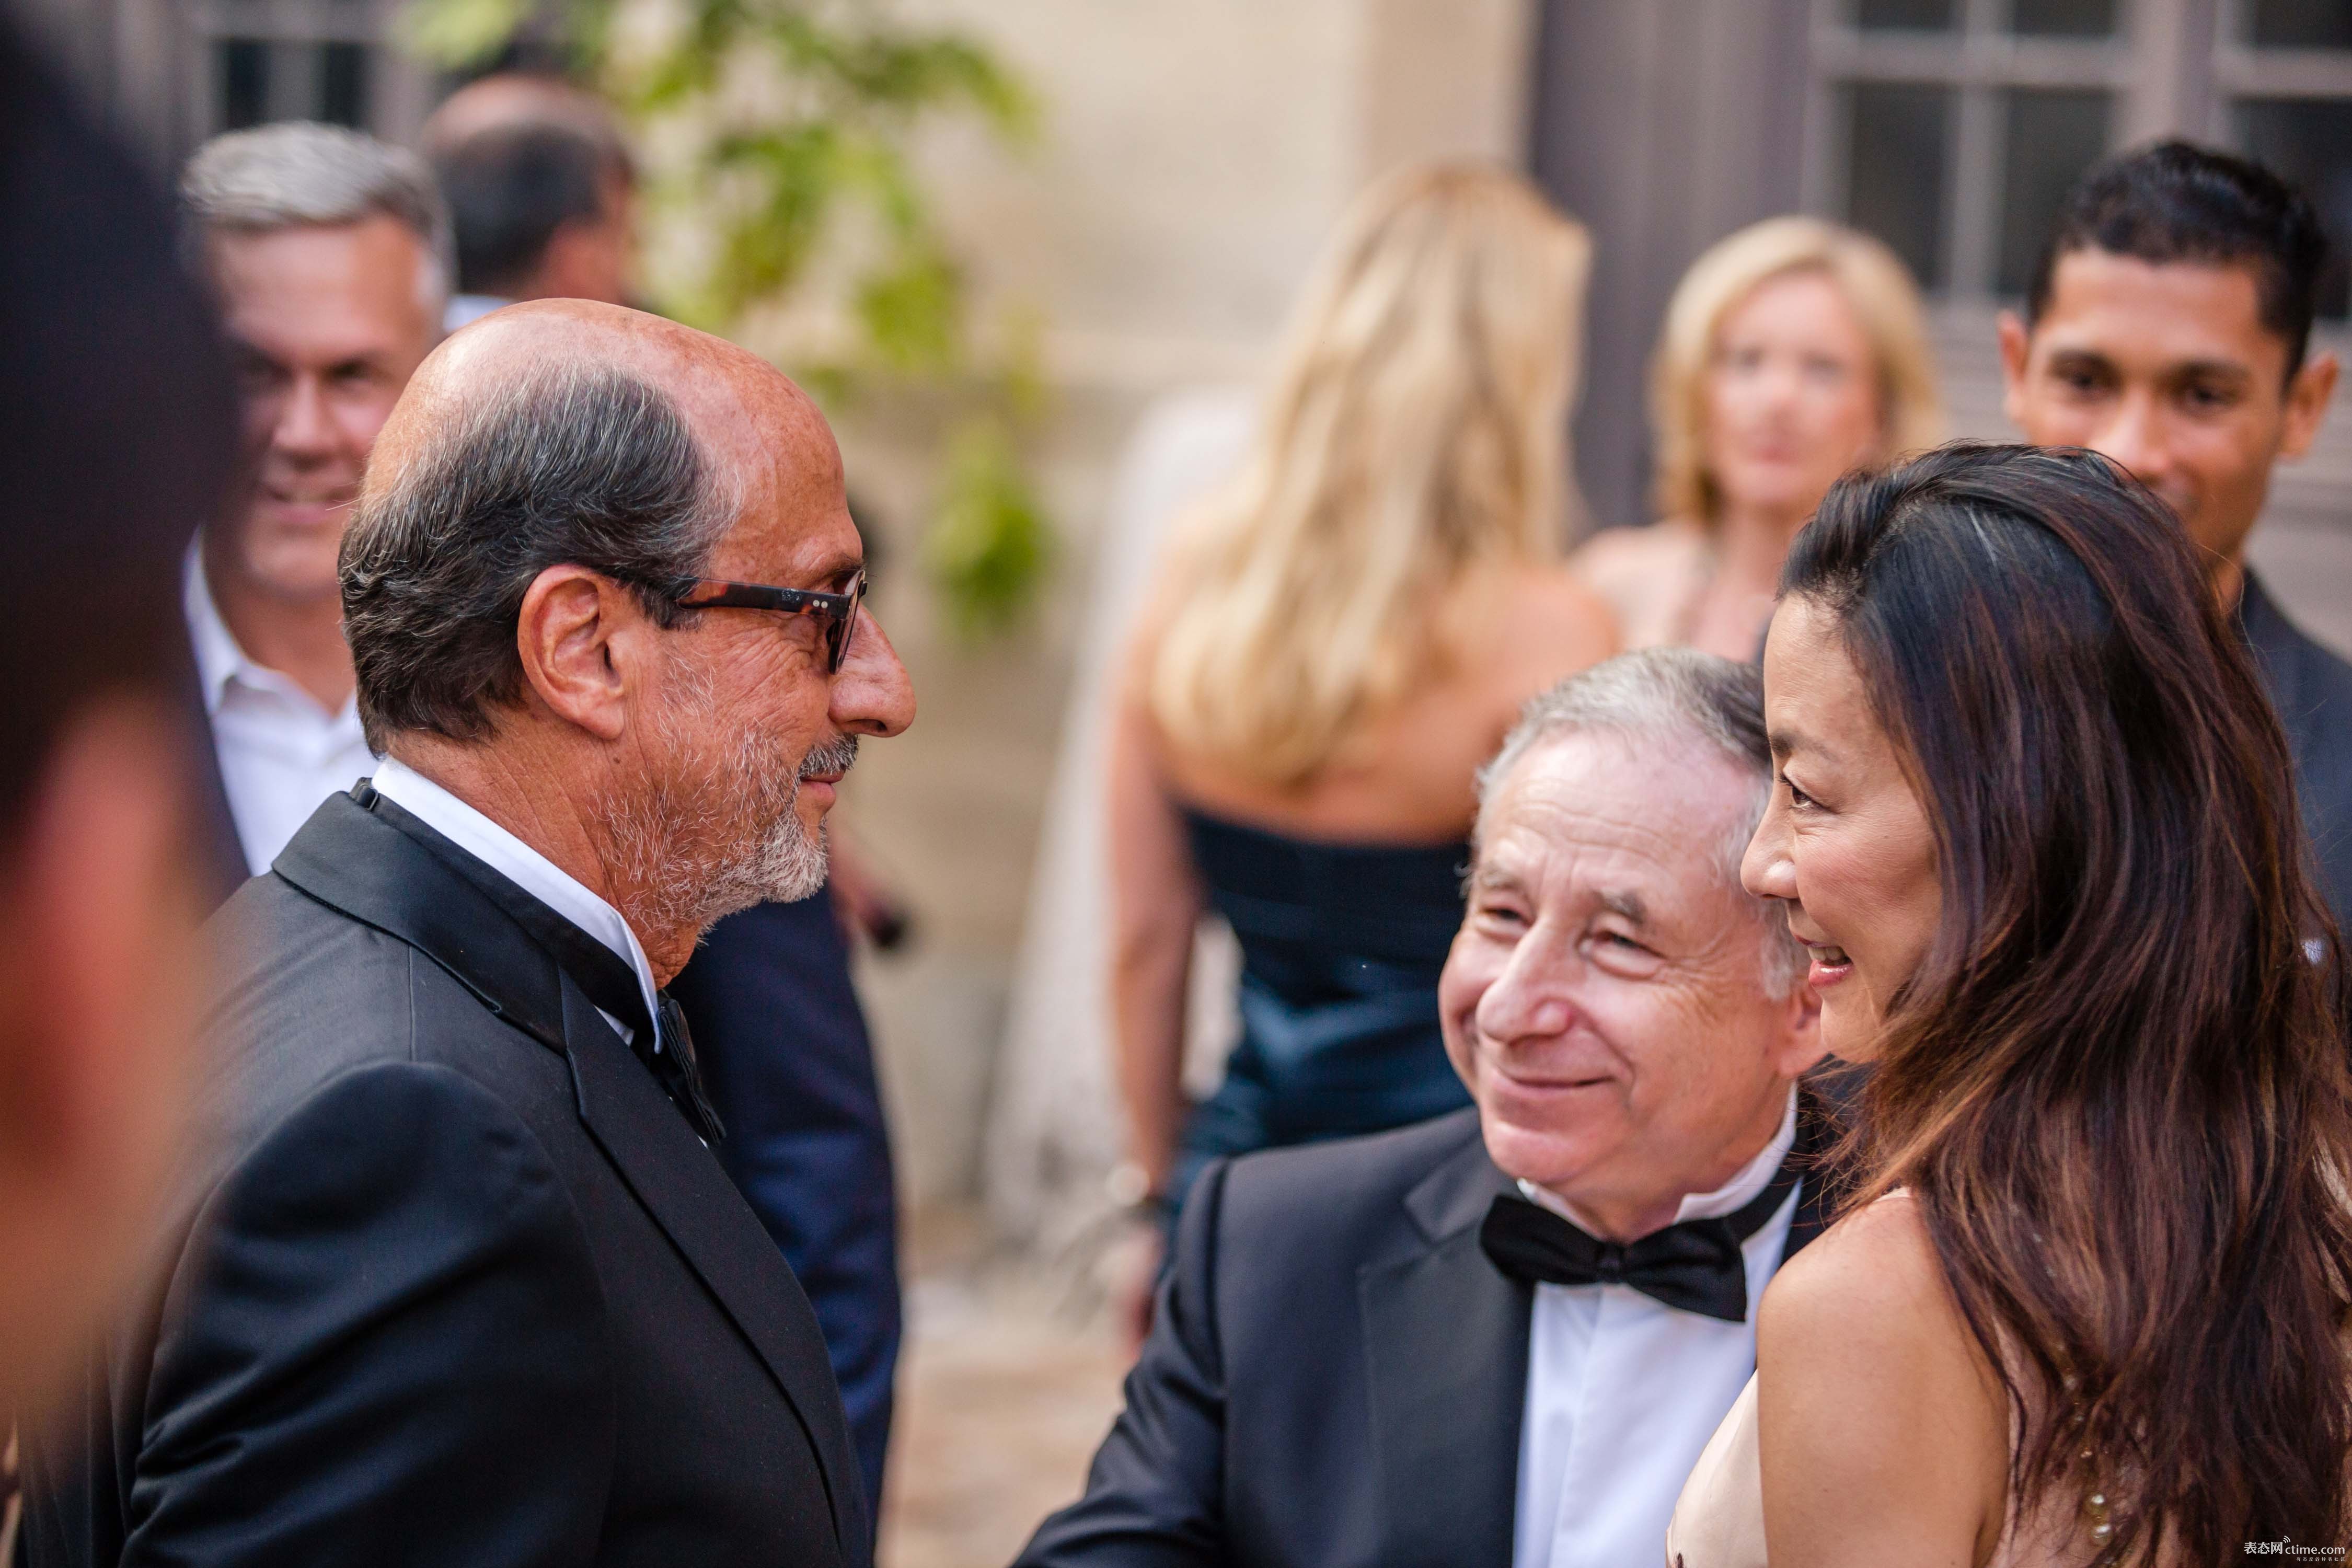 Richard Mille, Jean Todt and Michelle Yeoh, Concours Art & Elegance Richard Mille 2016 at Chantilly on September 4th 2016 - Photo Jean Dheilly DPPI.jpg